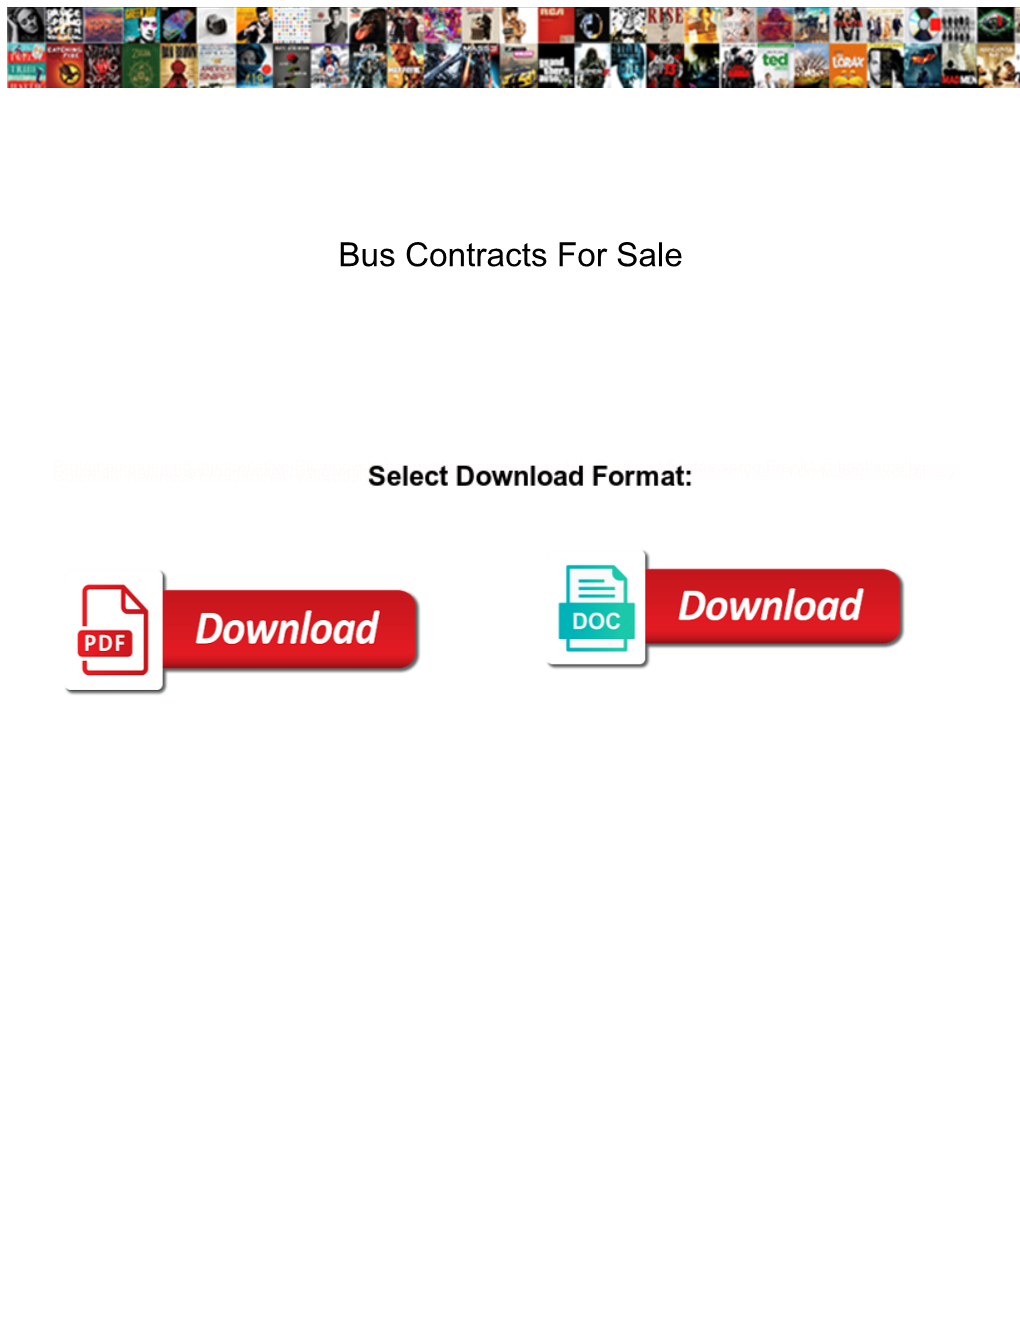 Bus Contracts for Sale